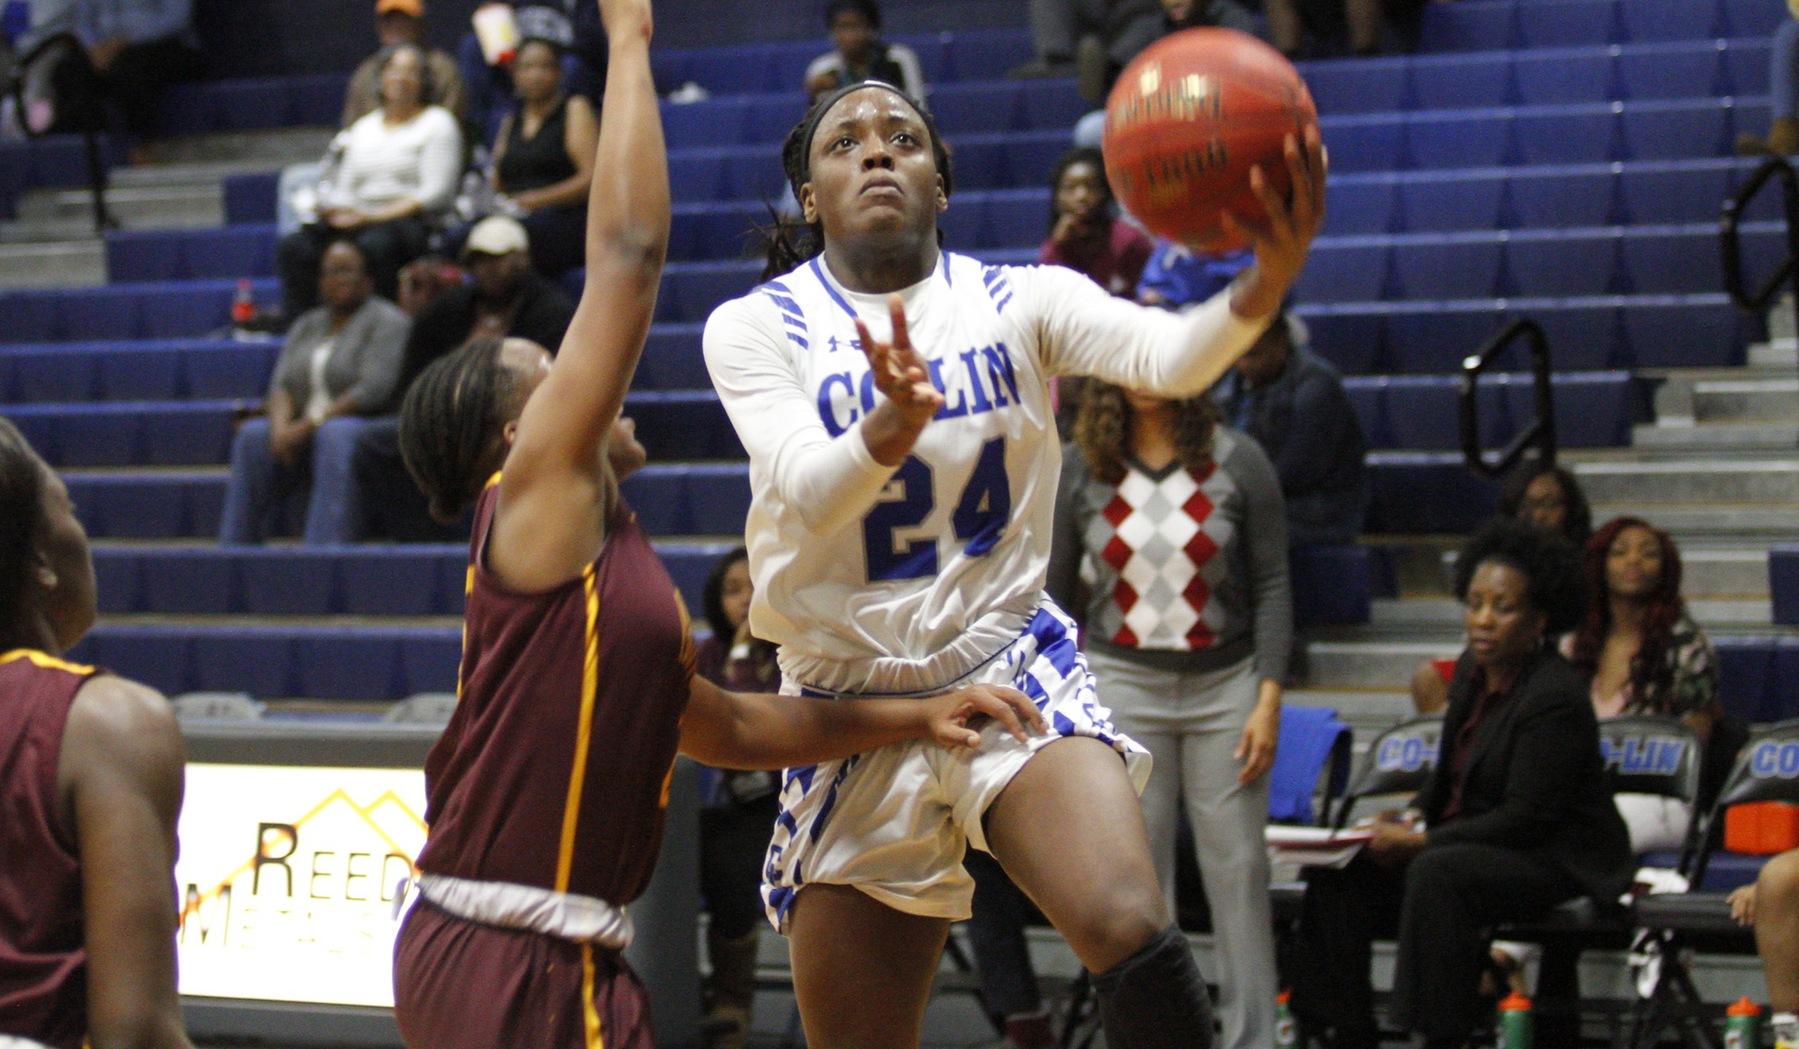 Lady Wolves come from behind from to defeat Hinds